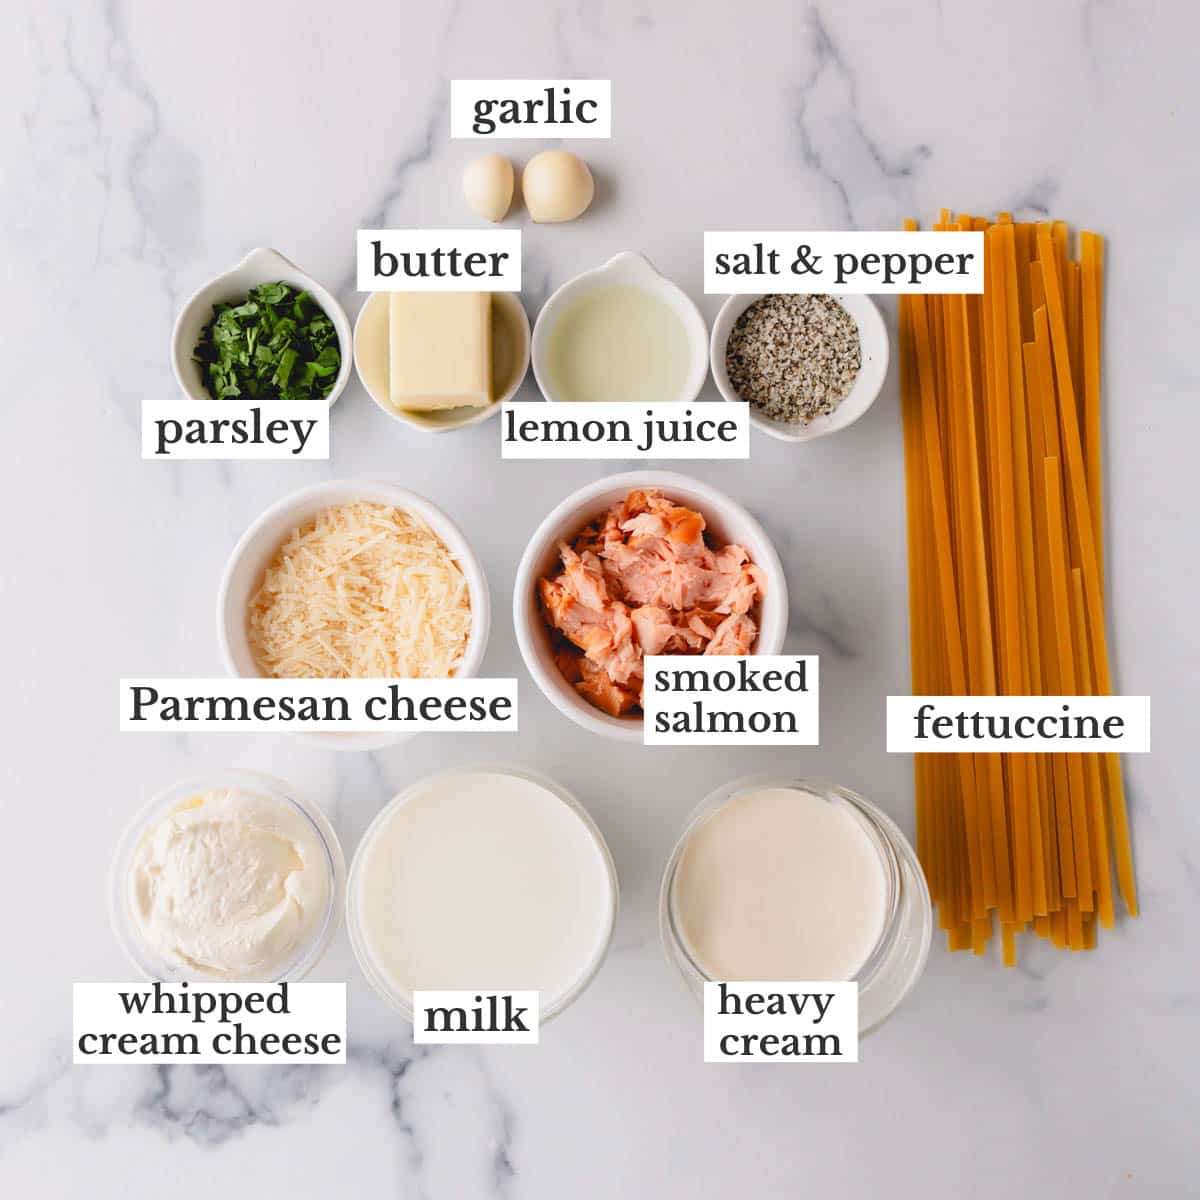 Ingredients needed to make smoked salmon fettuccine.